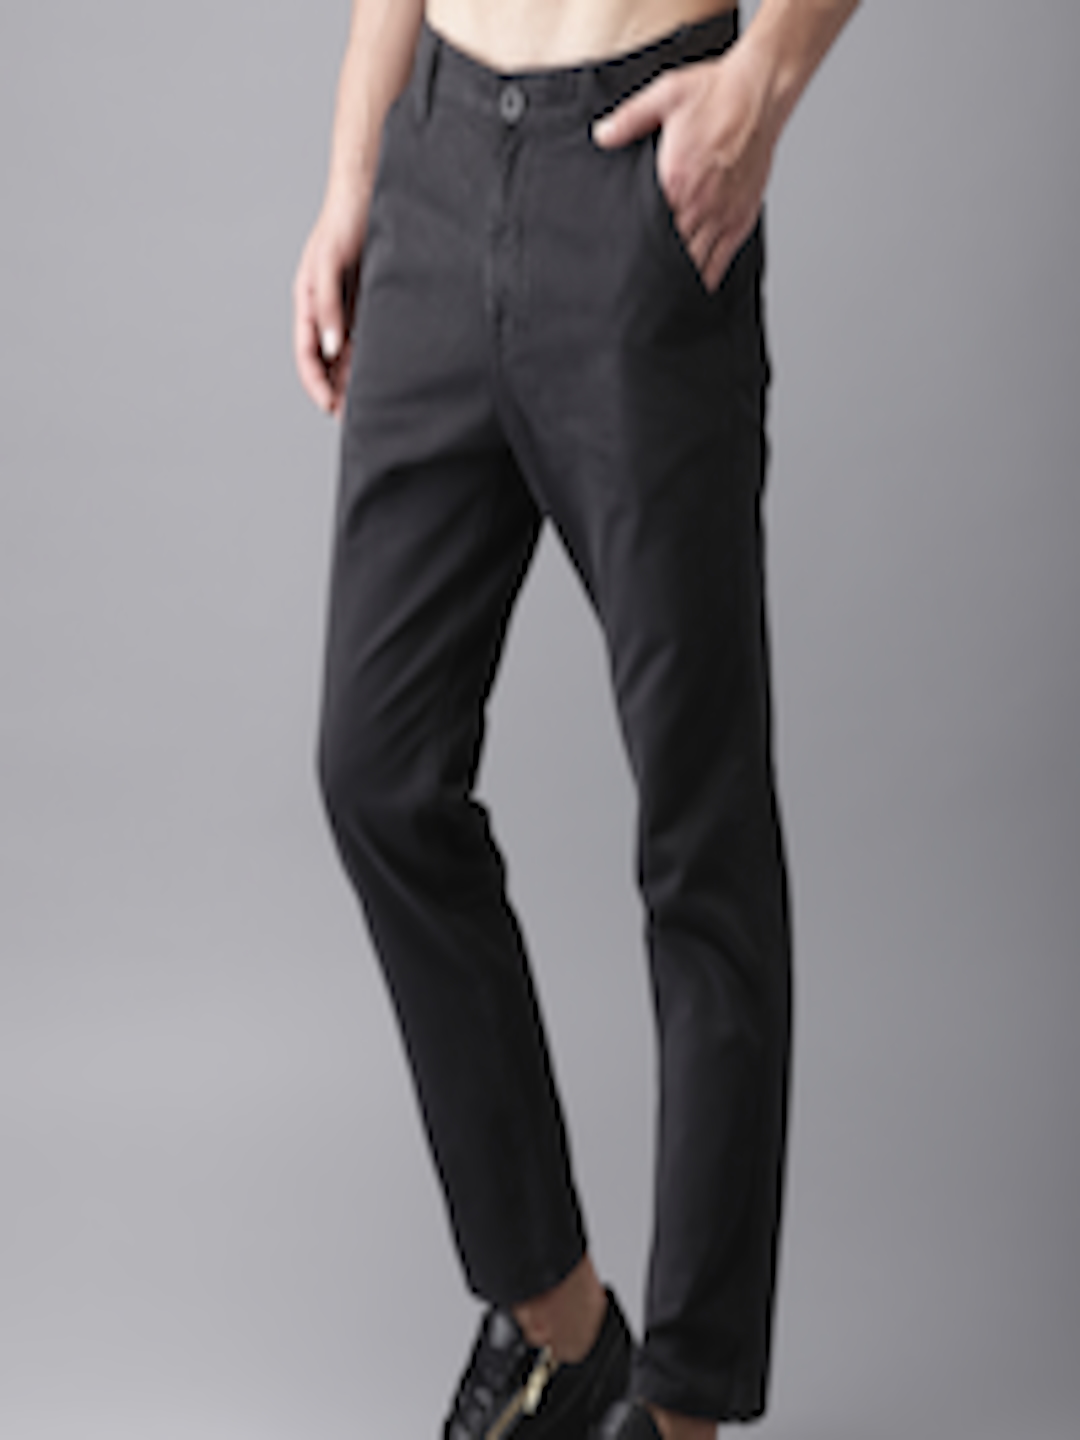 Buy HERE&NOW Men Black Slim Fit Solid Chinos - Trousers for Men 1999912 ...